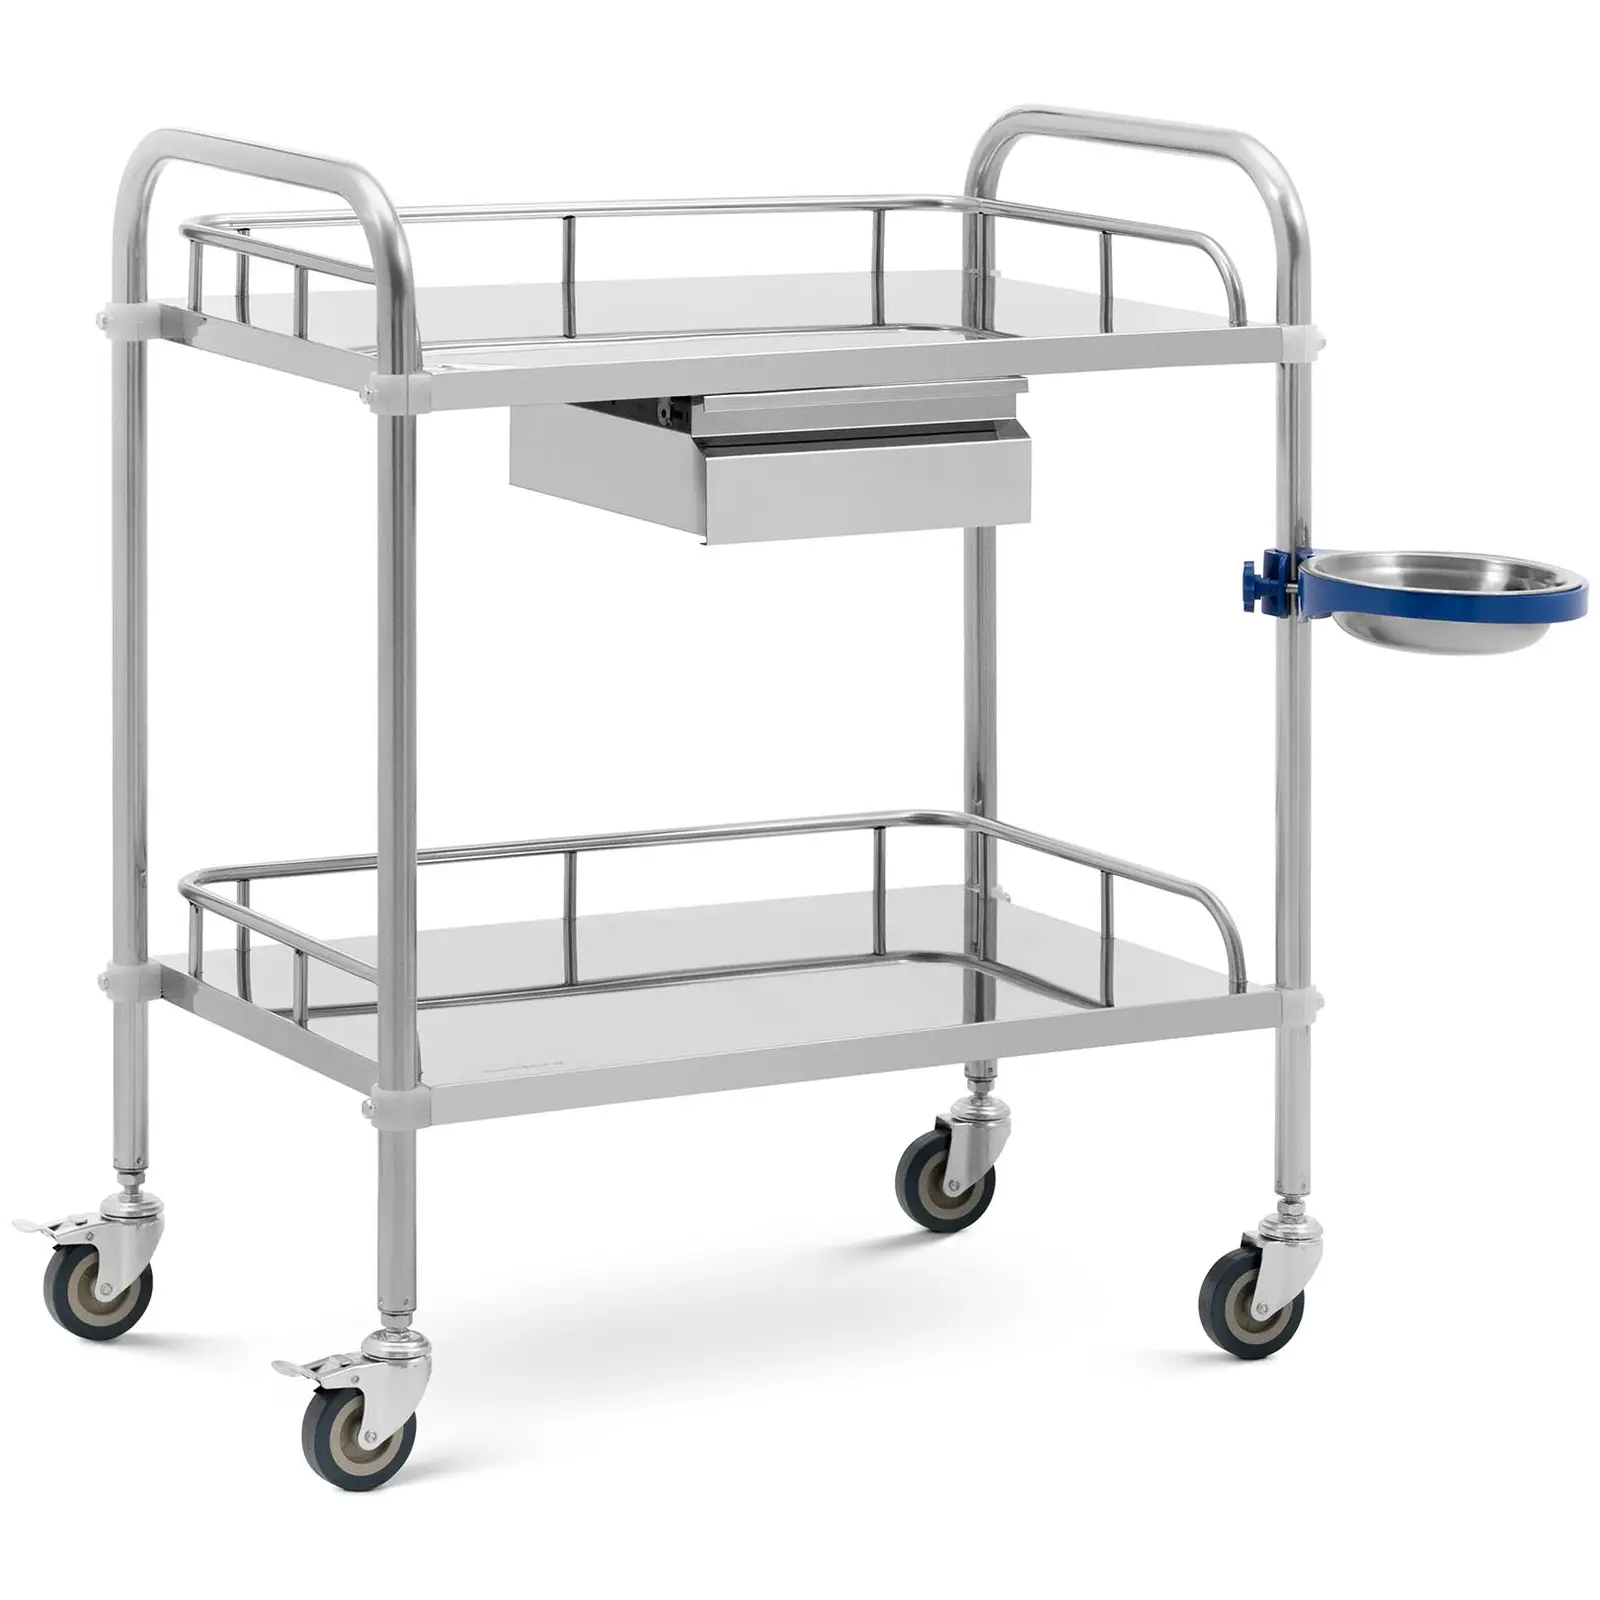 Laboratory Trolley - stainless steel - 2 shelves each 61 x 40 x 13 cm - 1 drawer - 20 kg